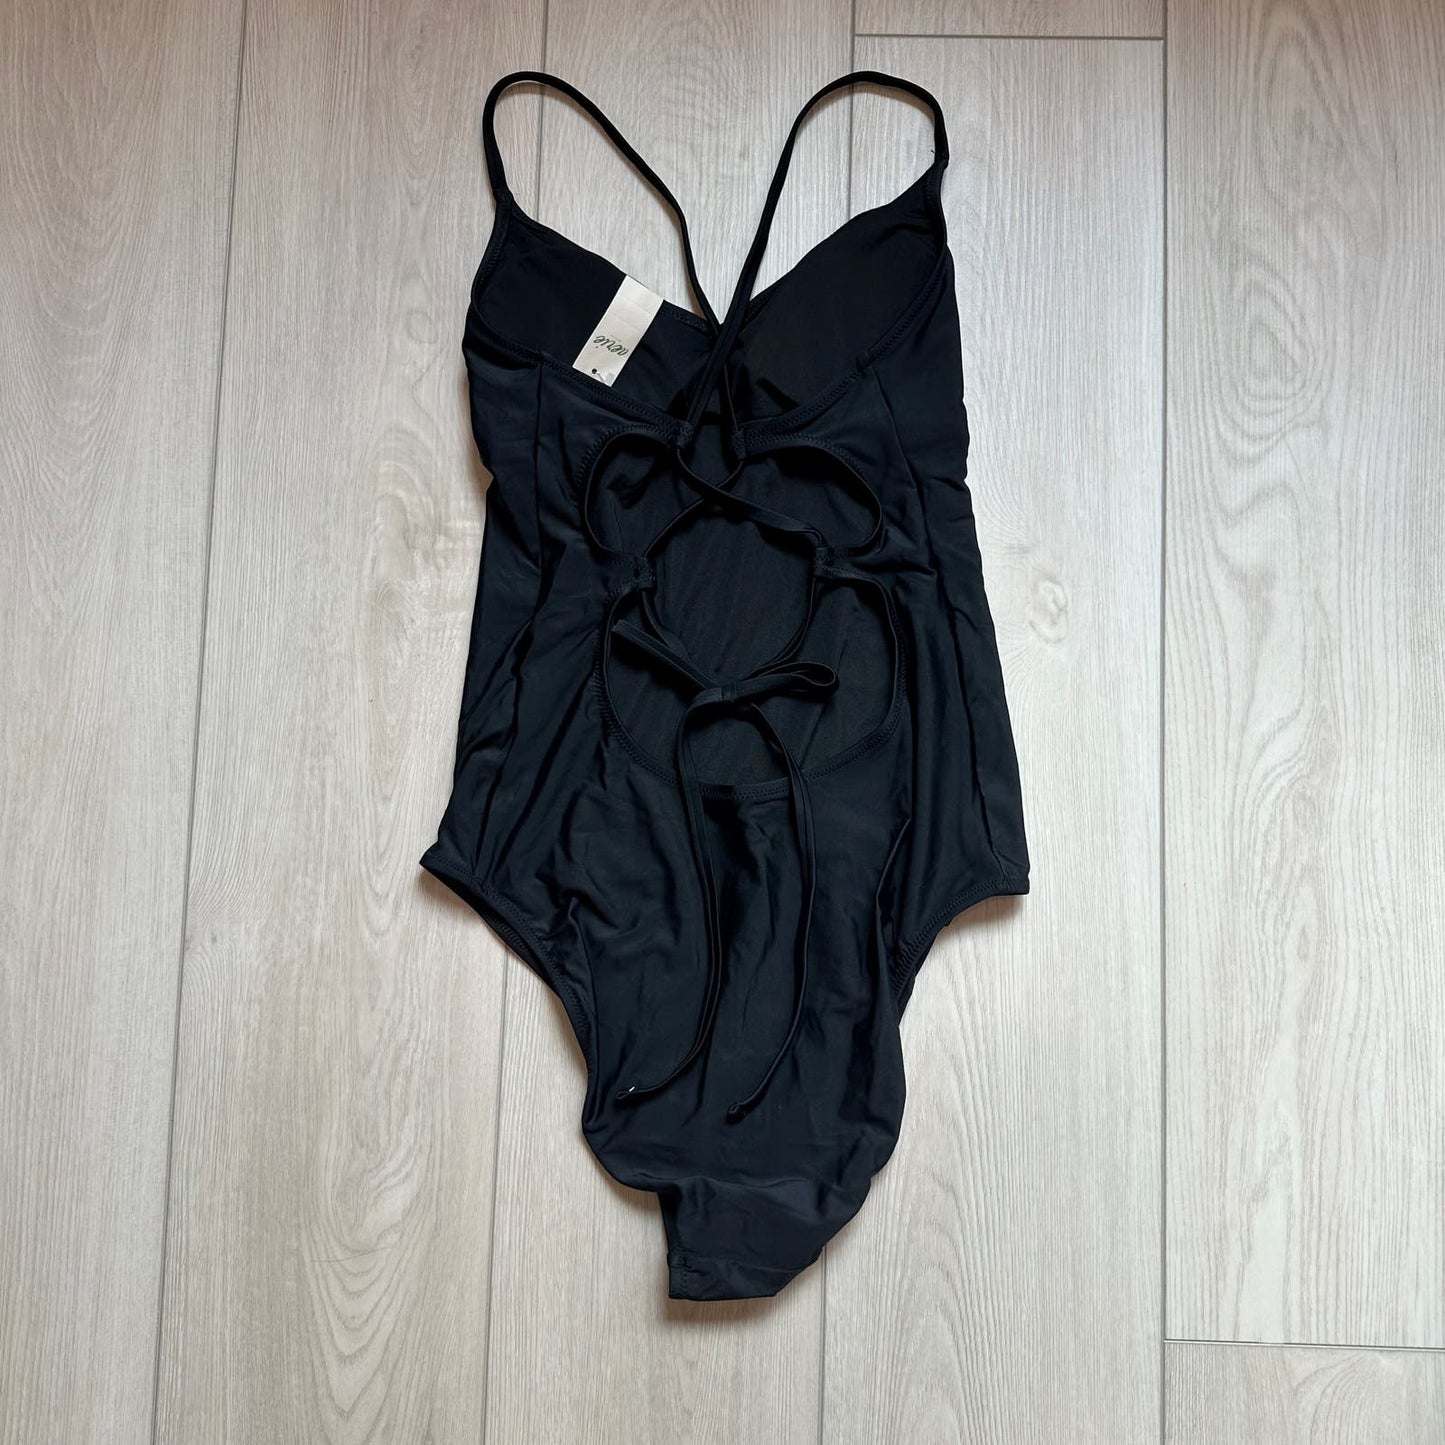 Aerie black strappy full coverage one piece swimsuit